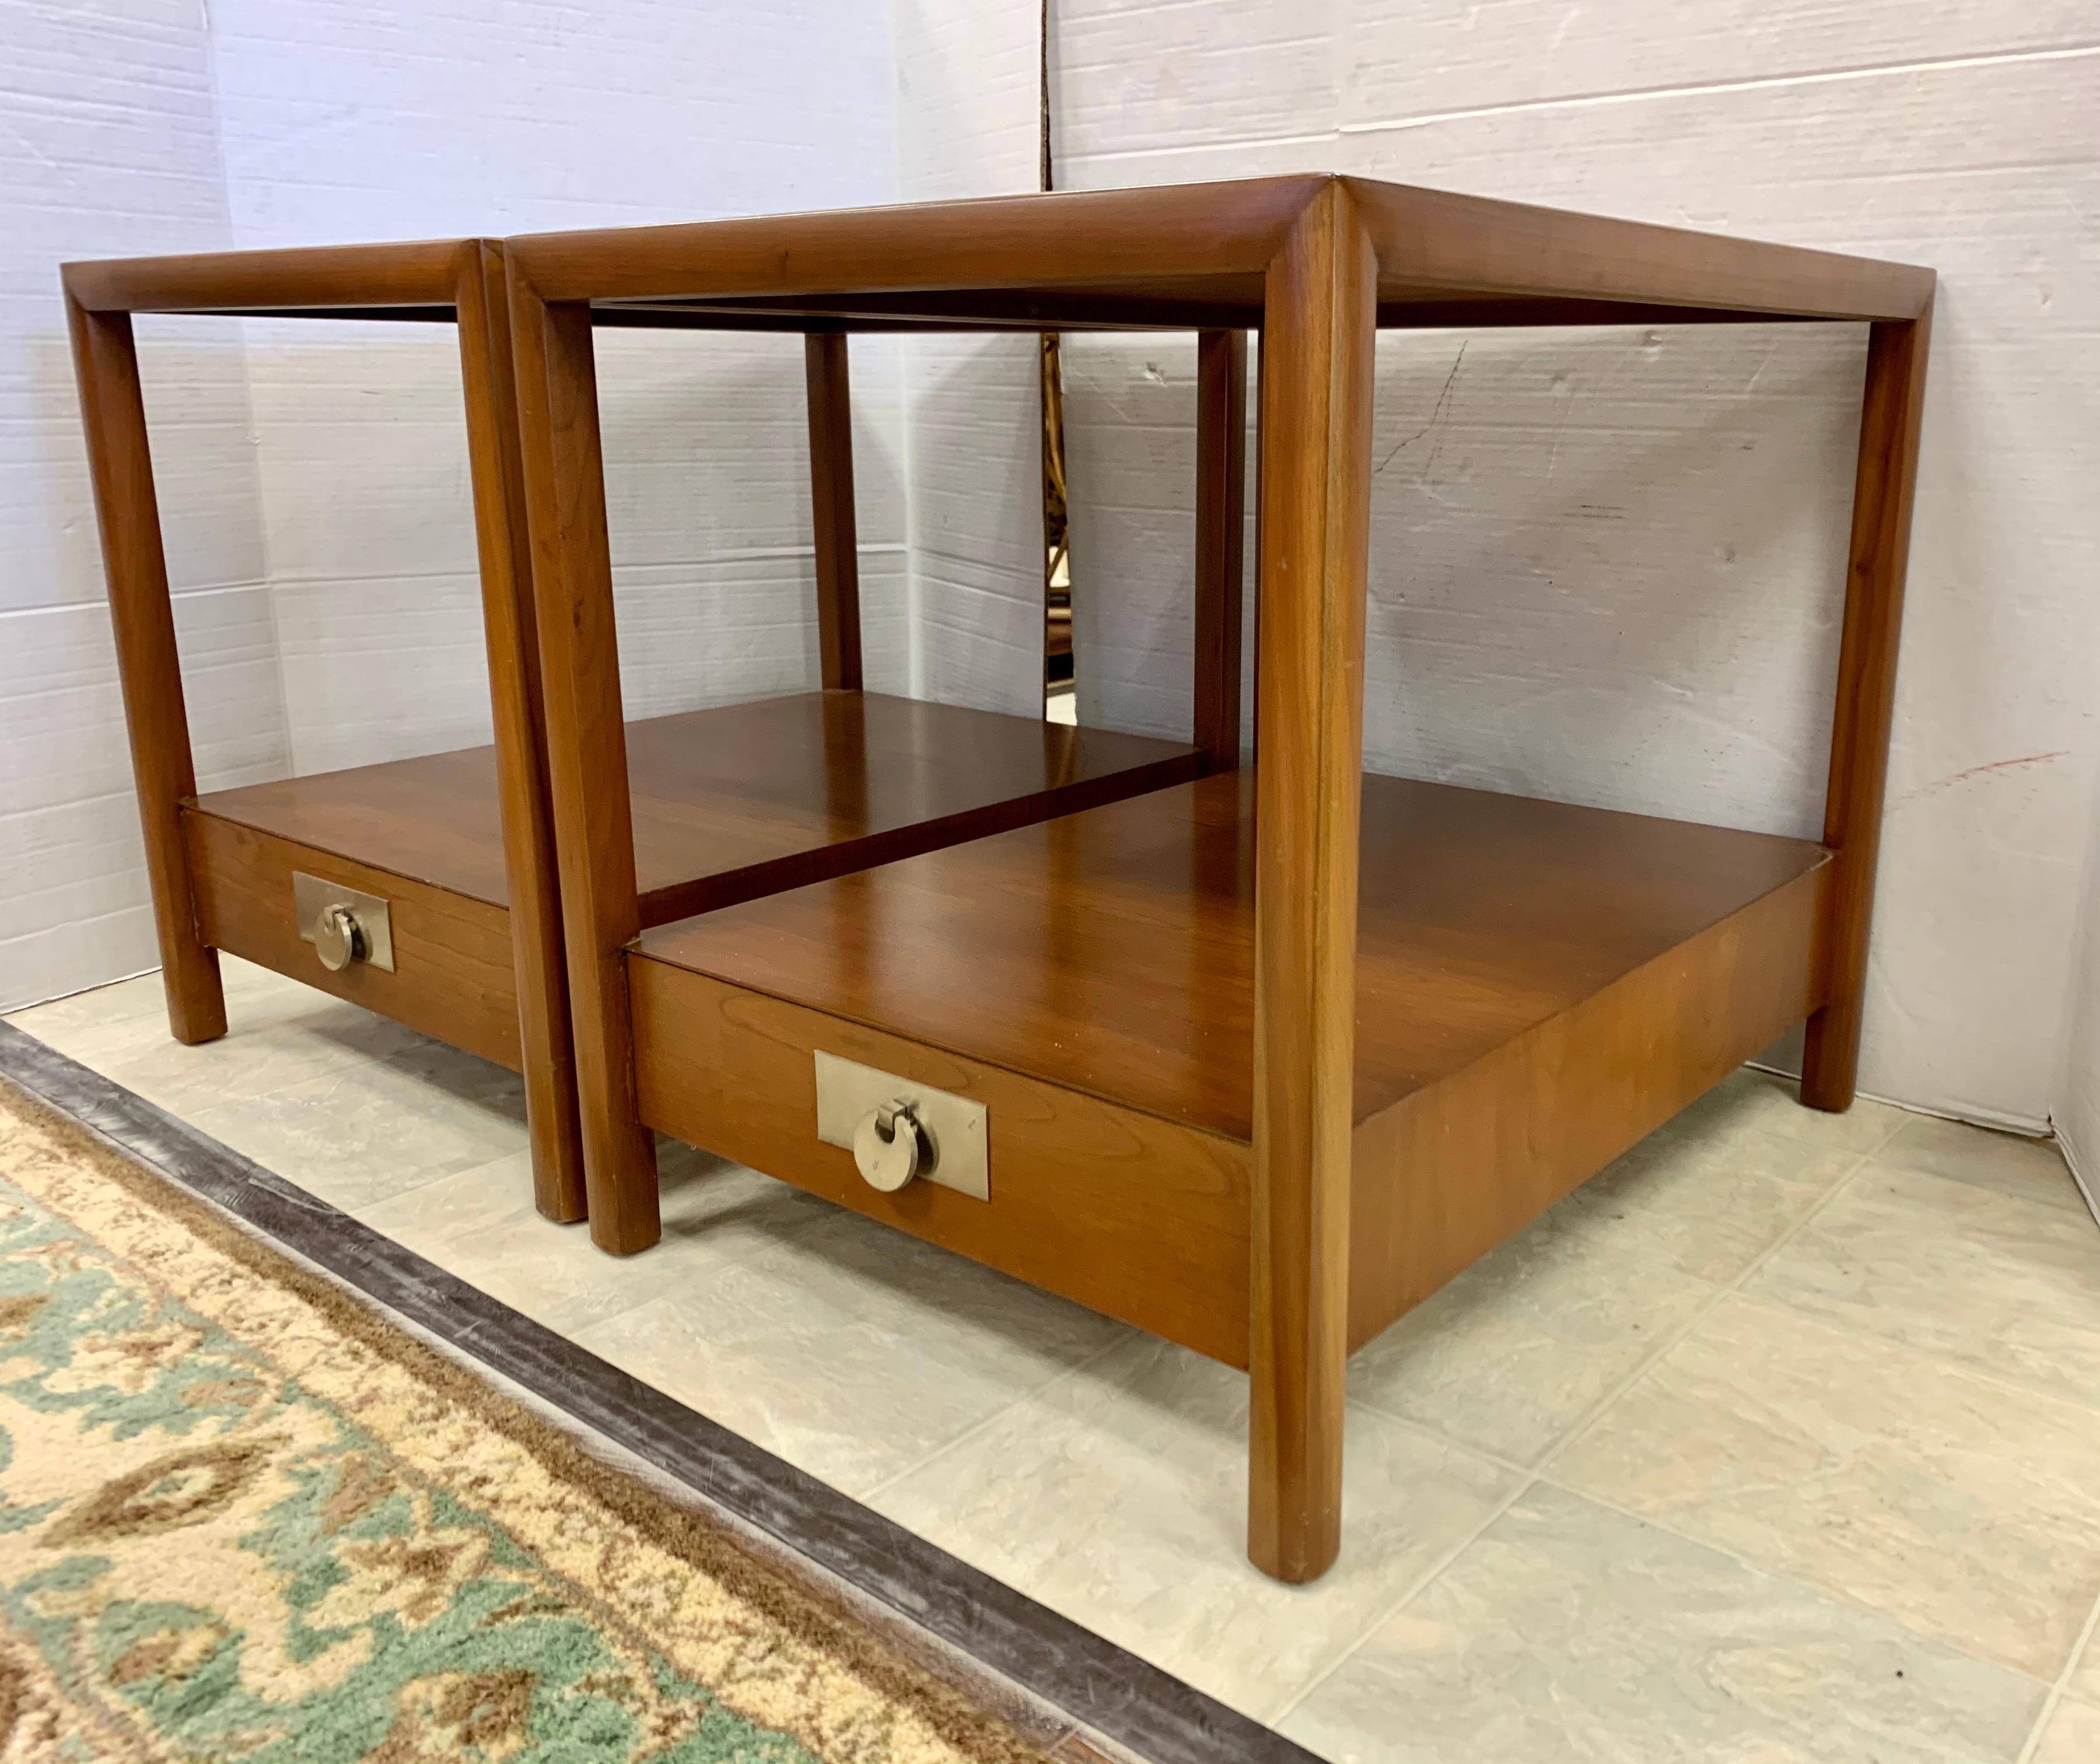 20th Century Pair of Rectangular Lamp Tables by Michael Taylor for Baker Furniture New World